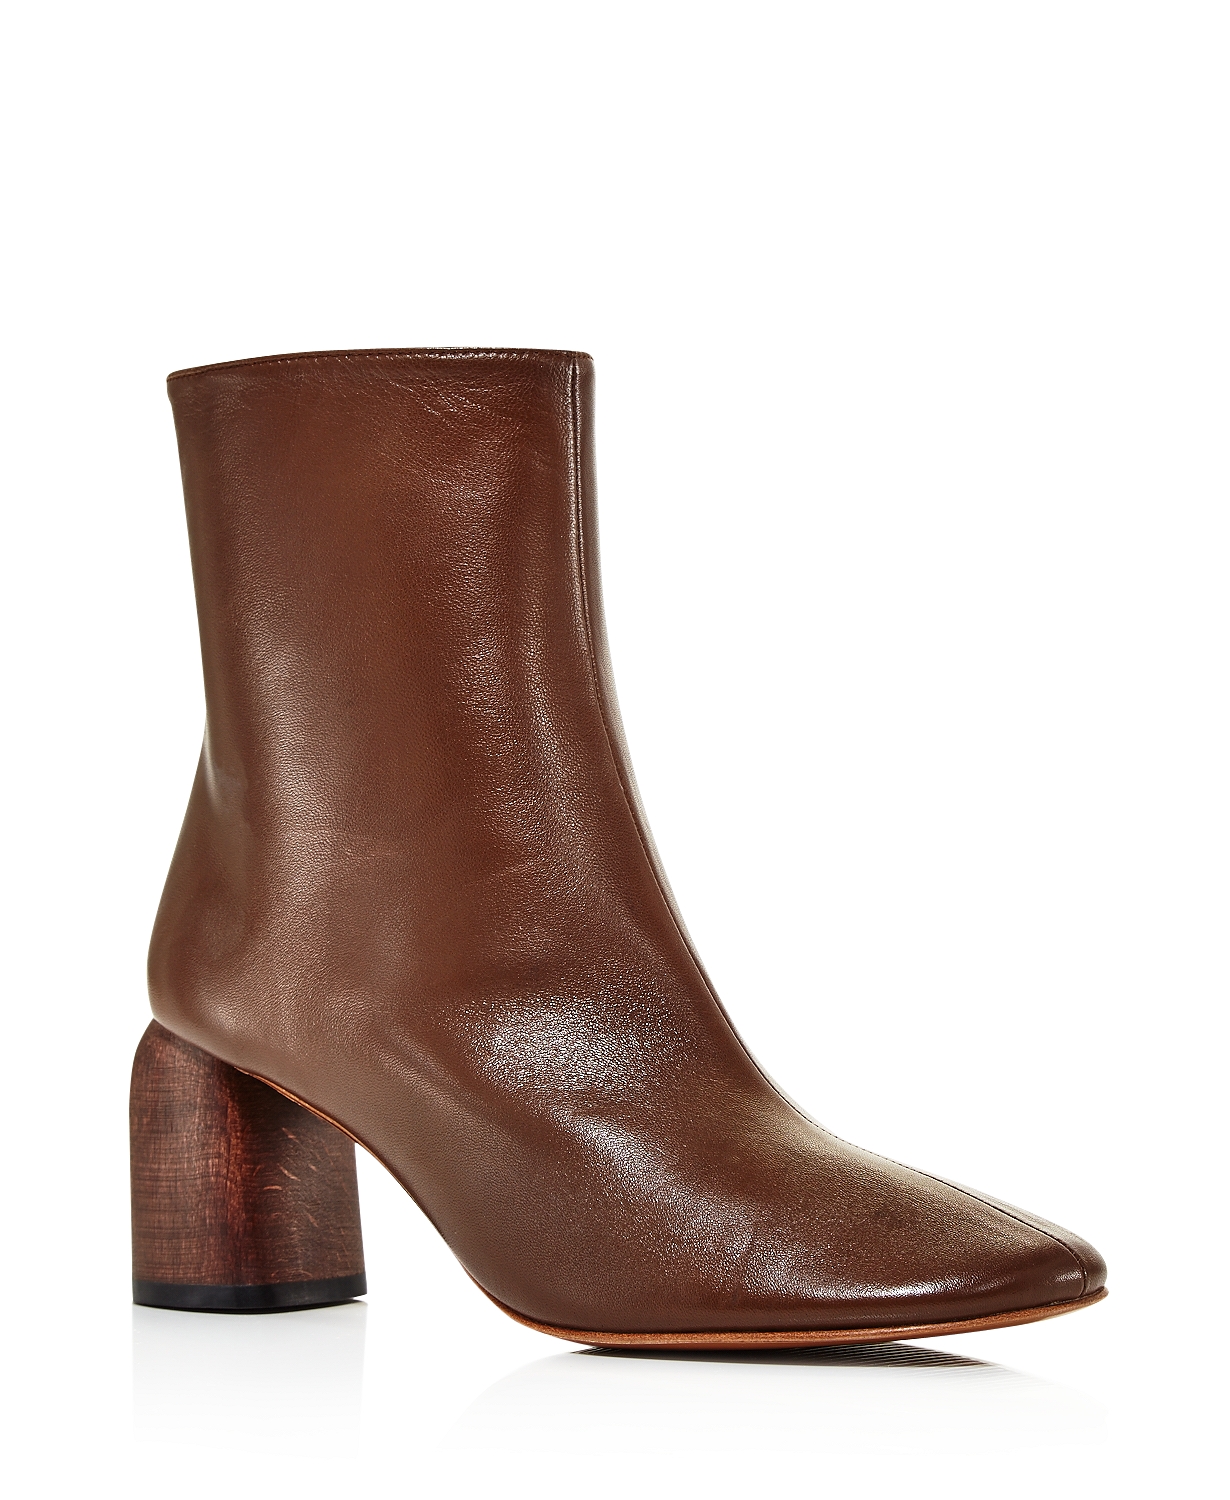 woocommerce-673321-2209615.cloudwaysapps.com-loq-womens-brown-leather-georgia-ankle-booties